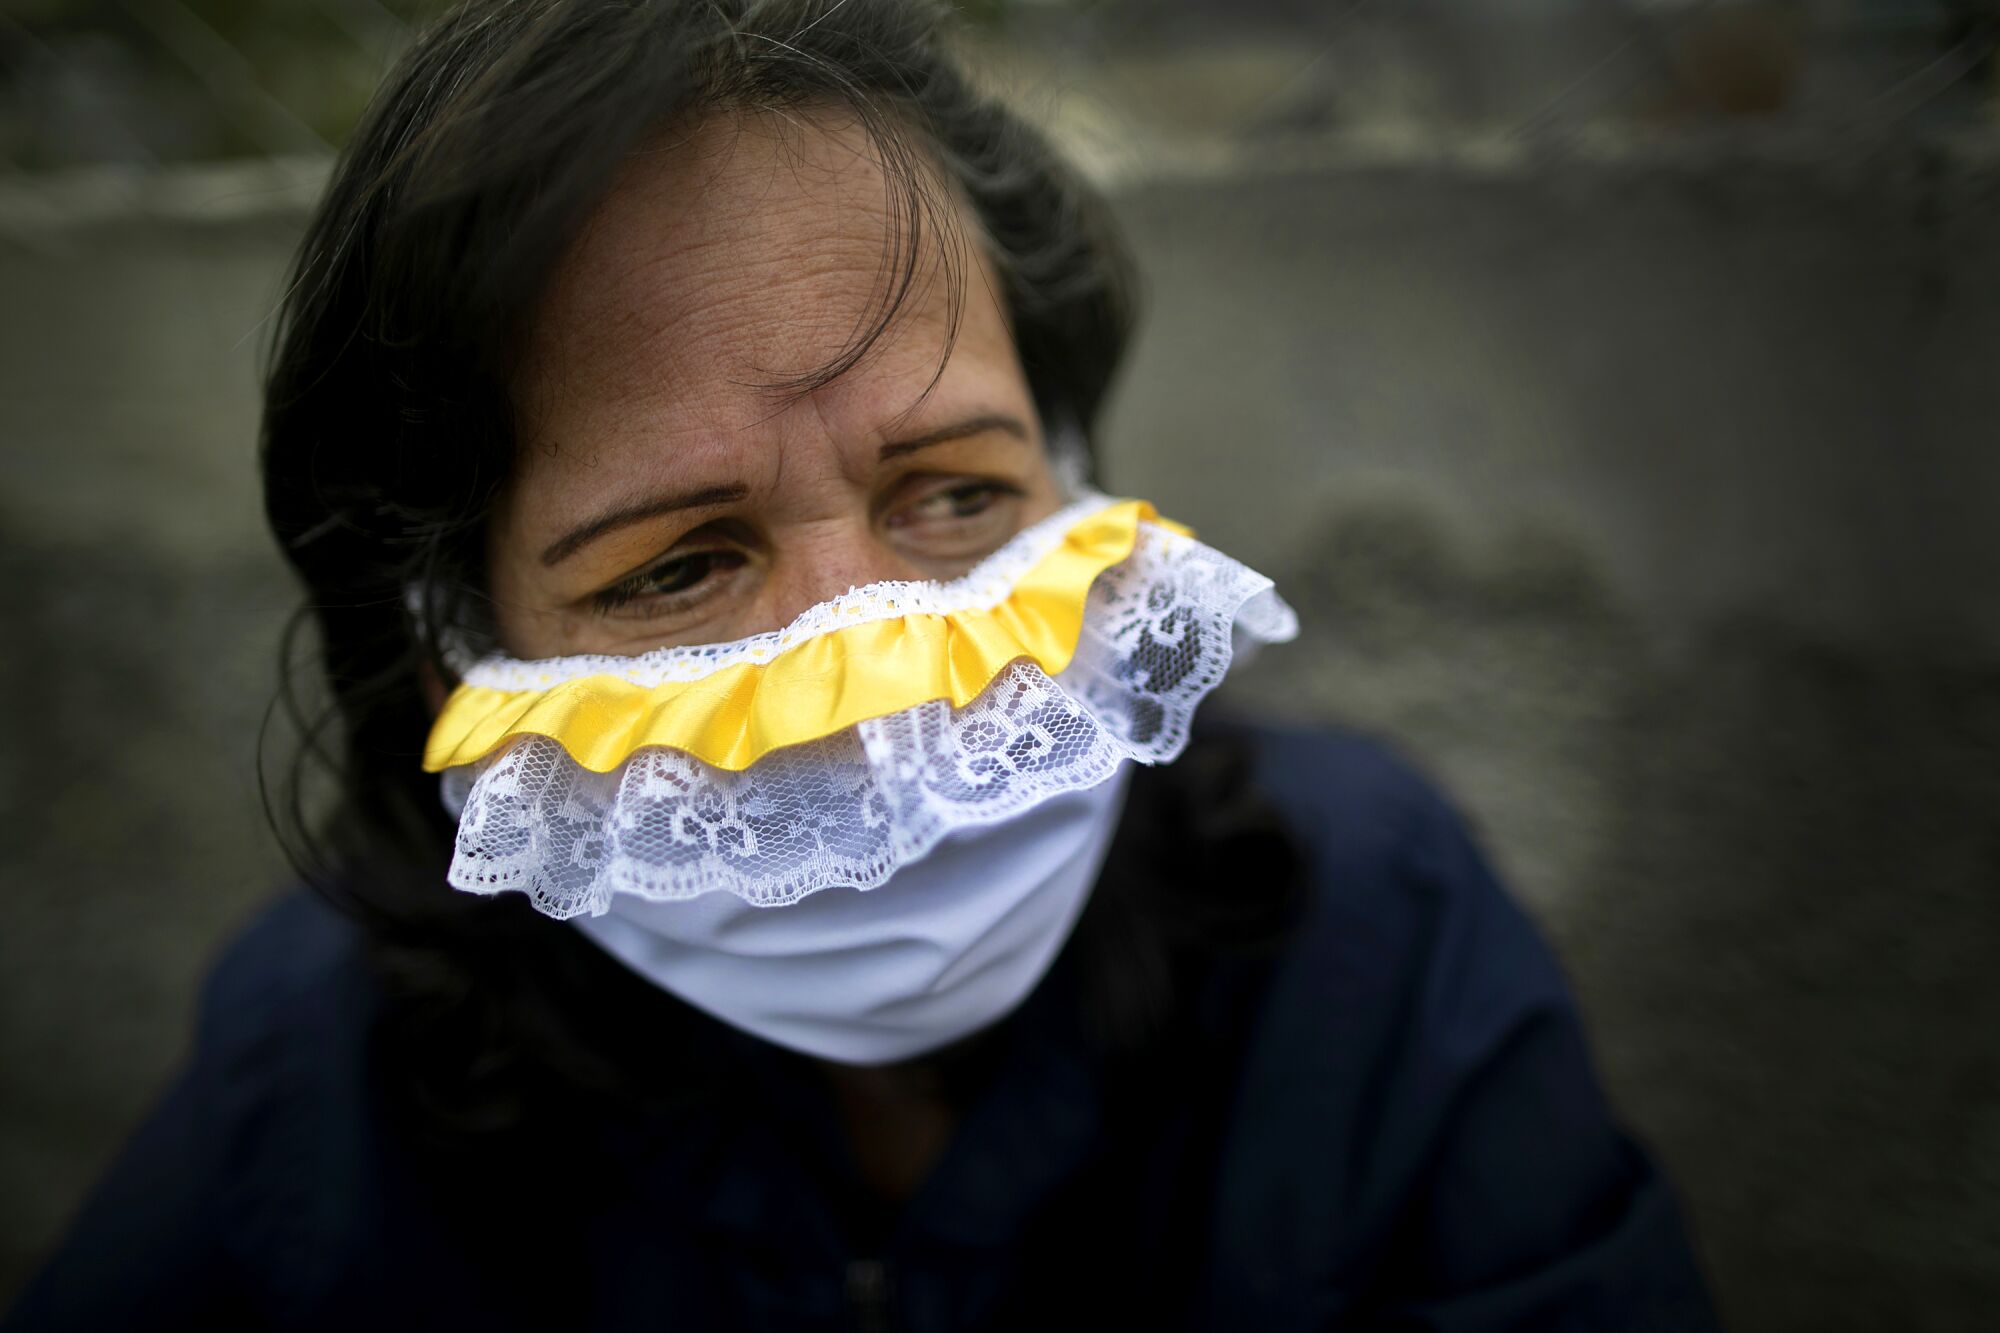 VENEZUELA: A woman wears a lacey homemade face mask as a precaution against the coronavirus as she waits in line to buy food in Caracas.